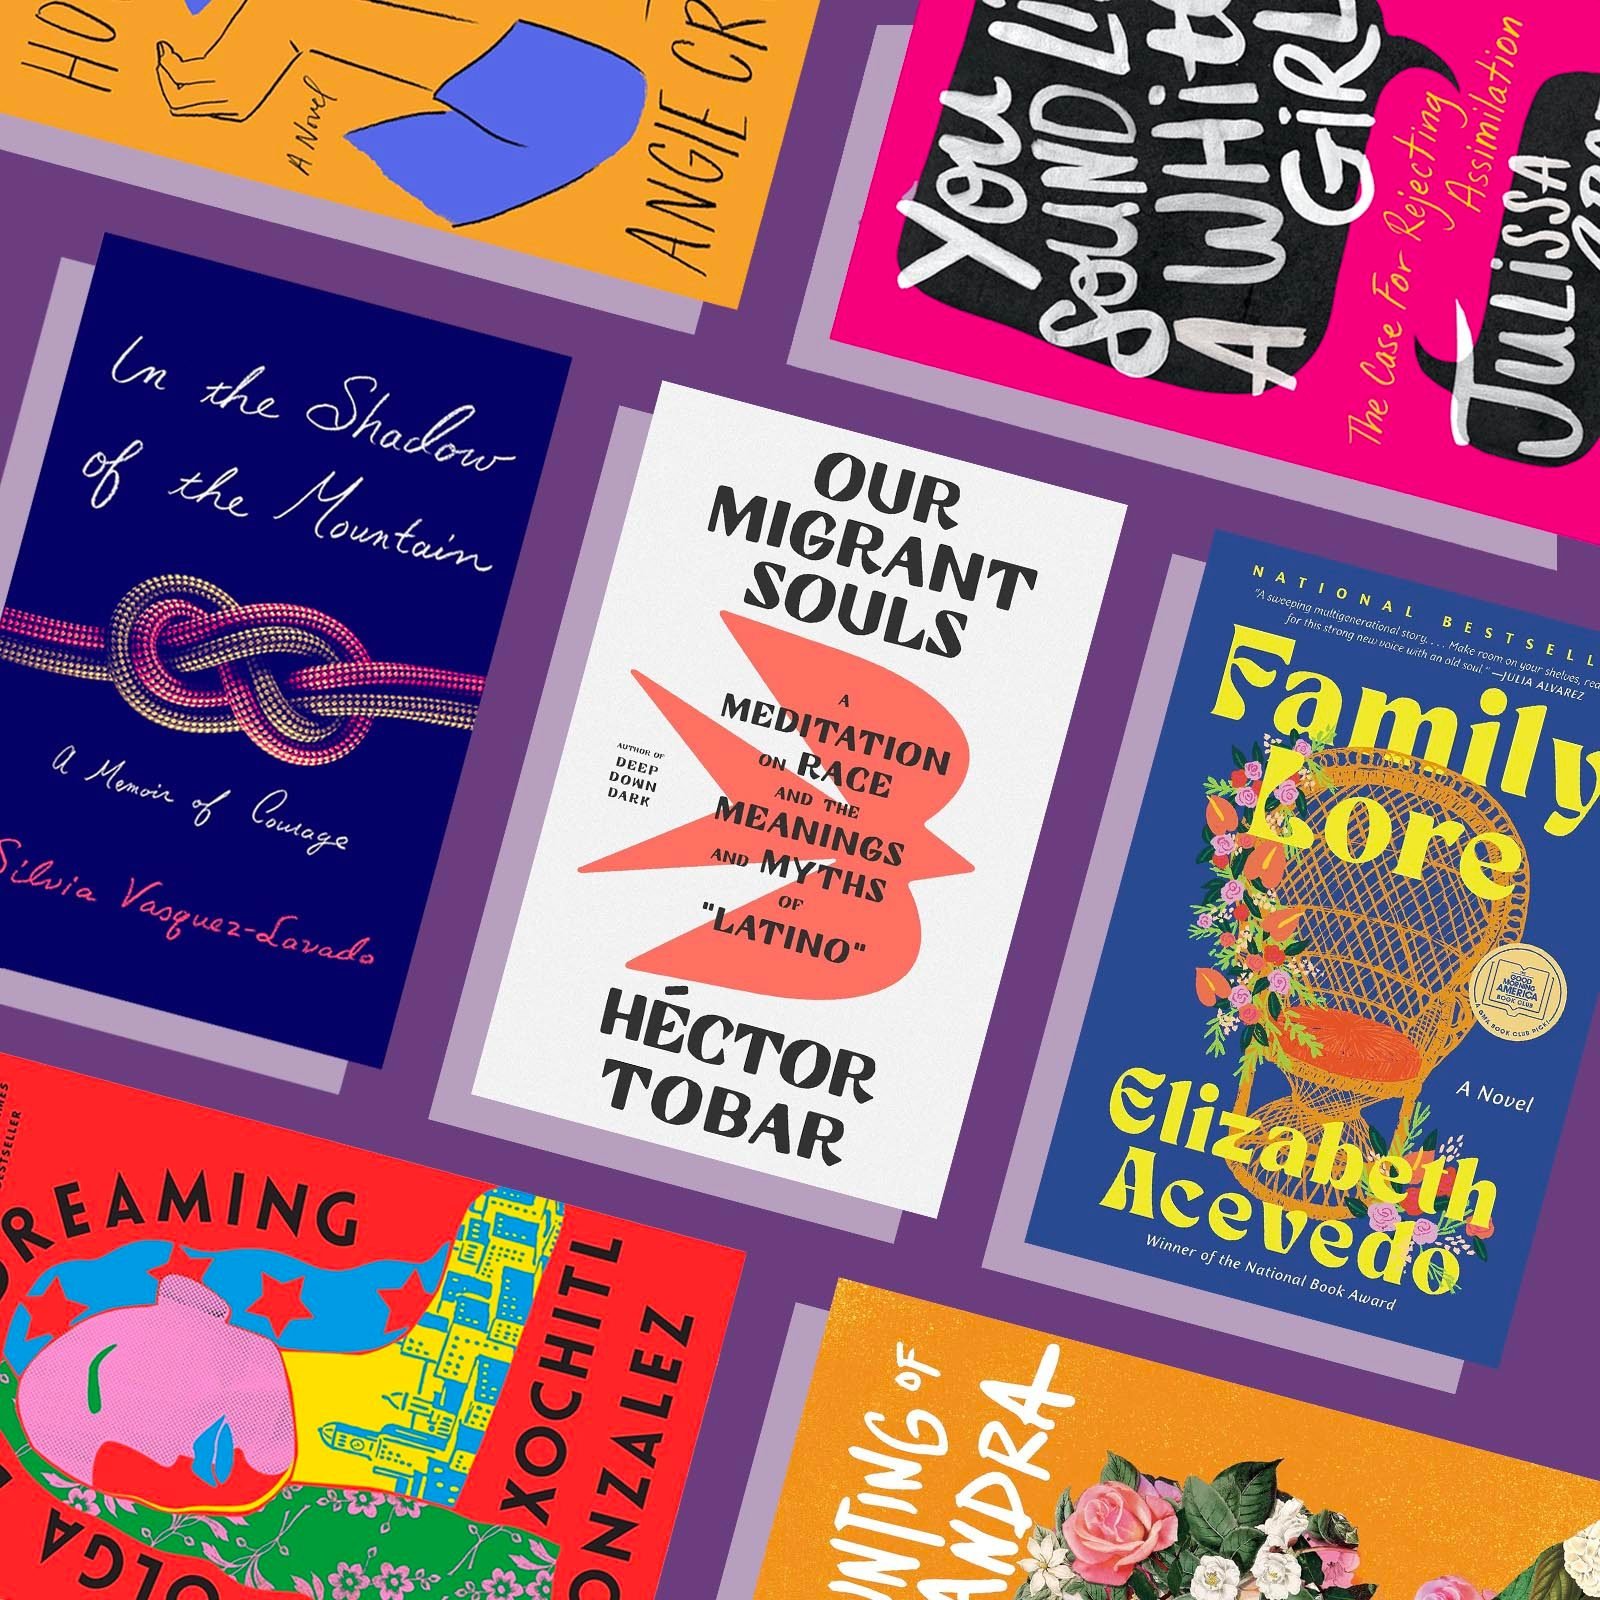 The best books to read right now